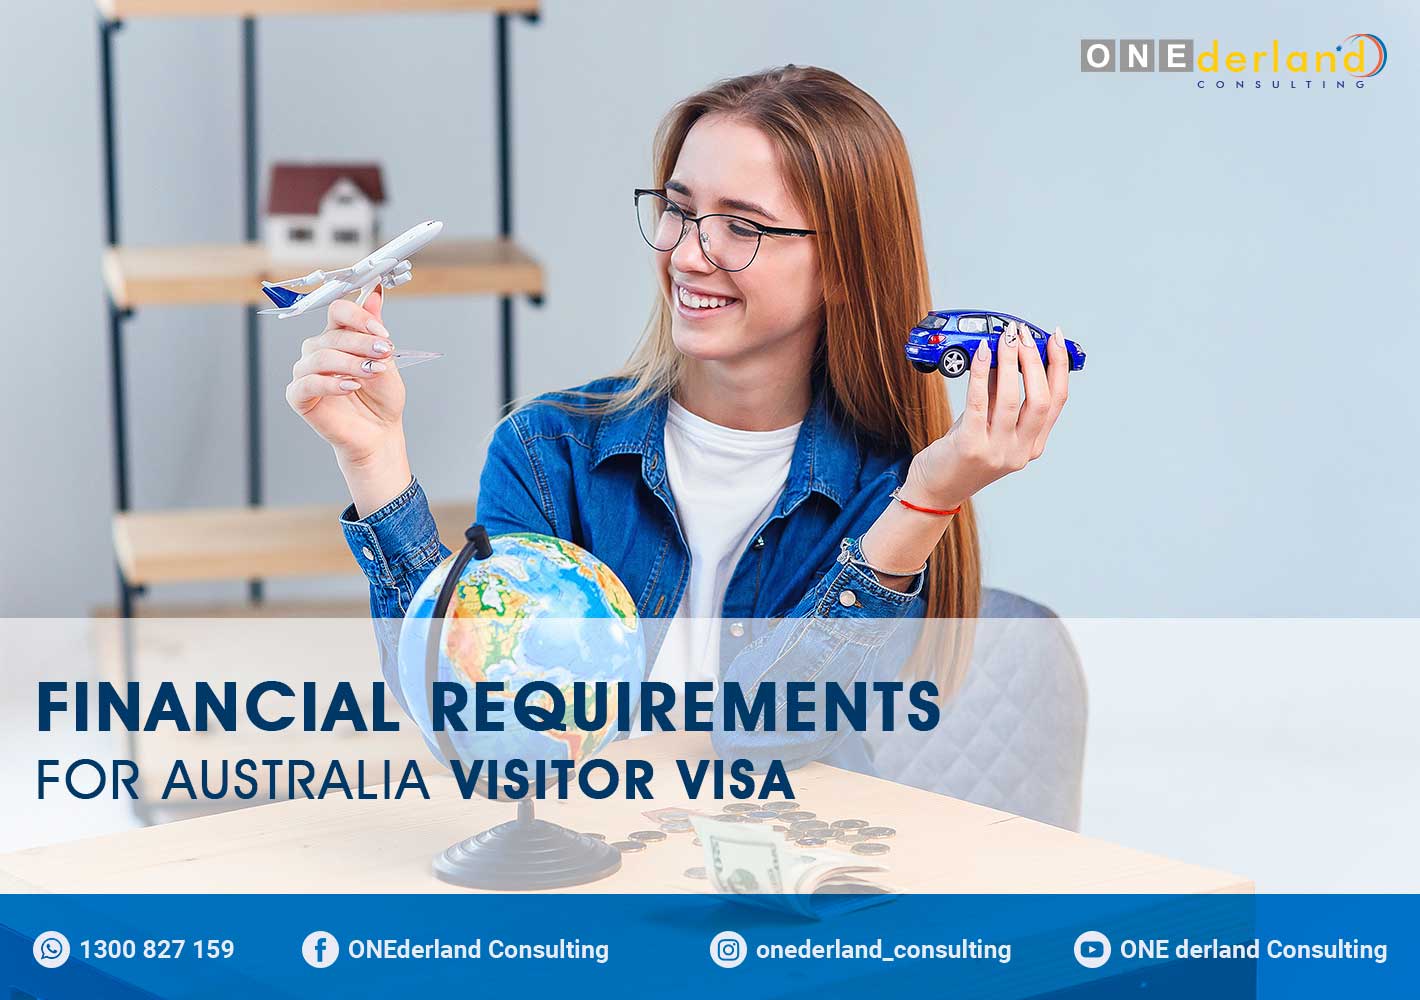 What are the Financial Requirements for Visitor Visa Australia?